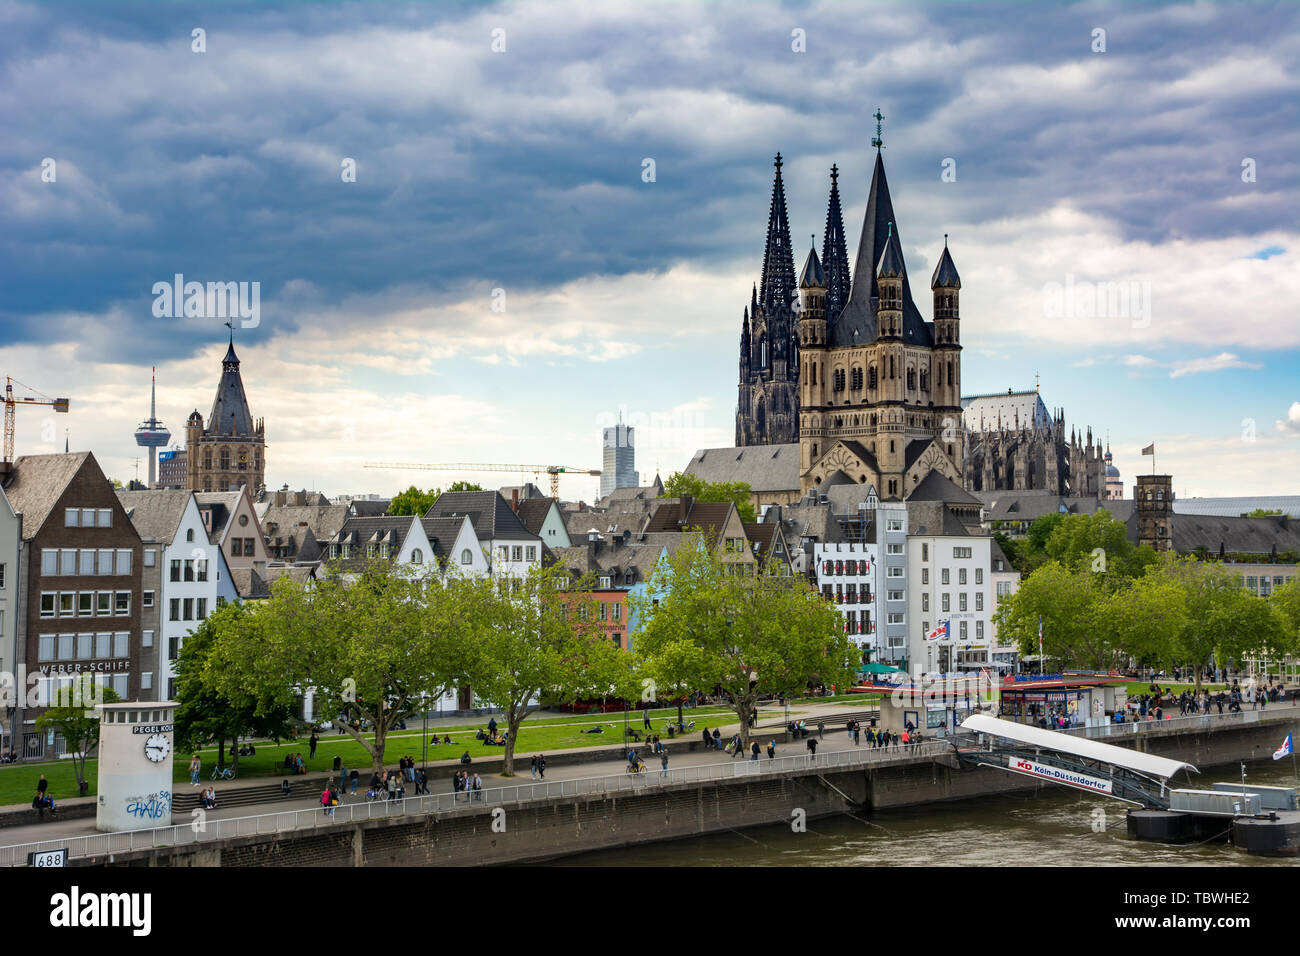 COLOGNE, GERMANY - MAY 12: Tourists at the river Rhine in Cologne, Germany on May 12, 2019. View to Cologne Cathedral and Great Sain Martin church. Stock Photo